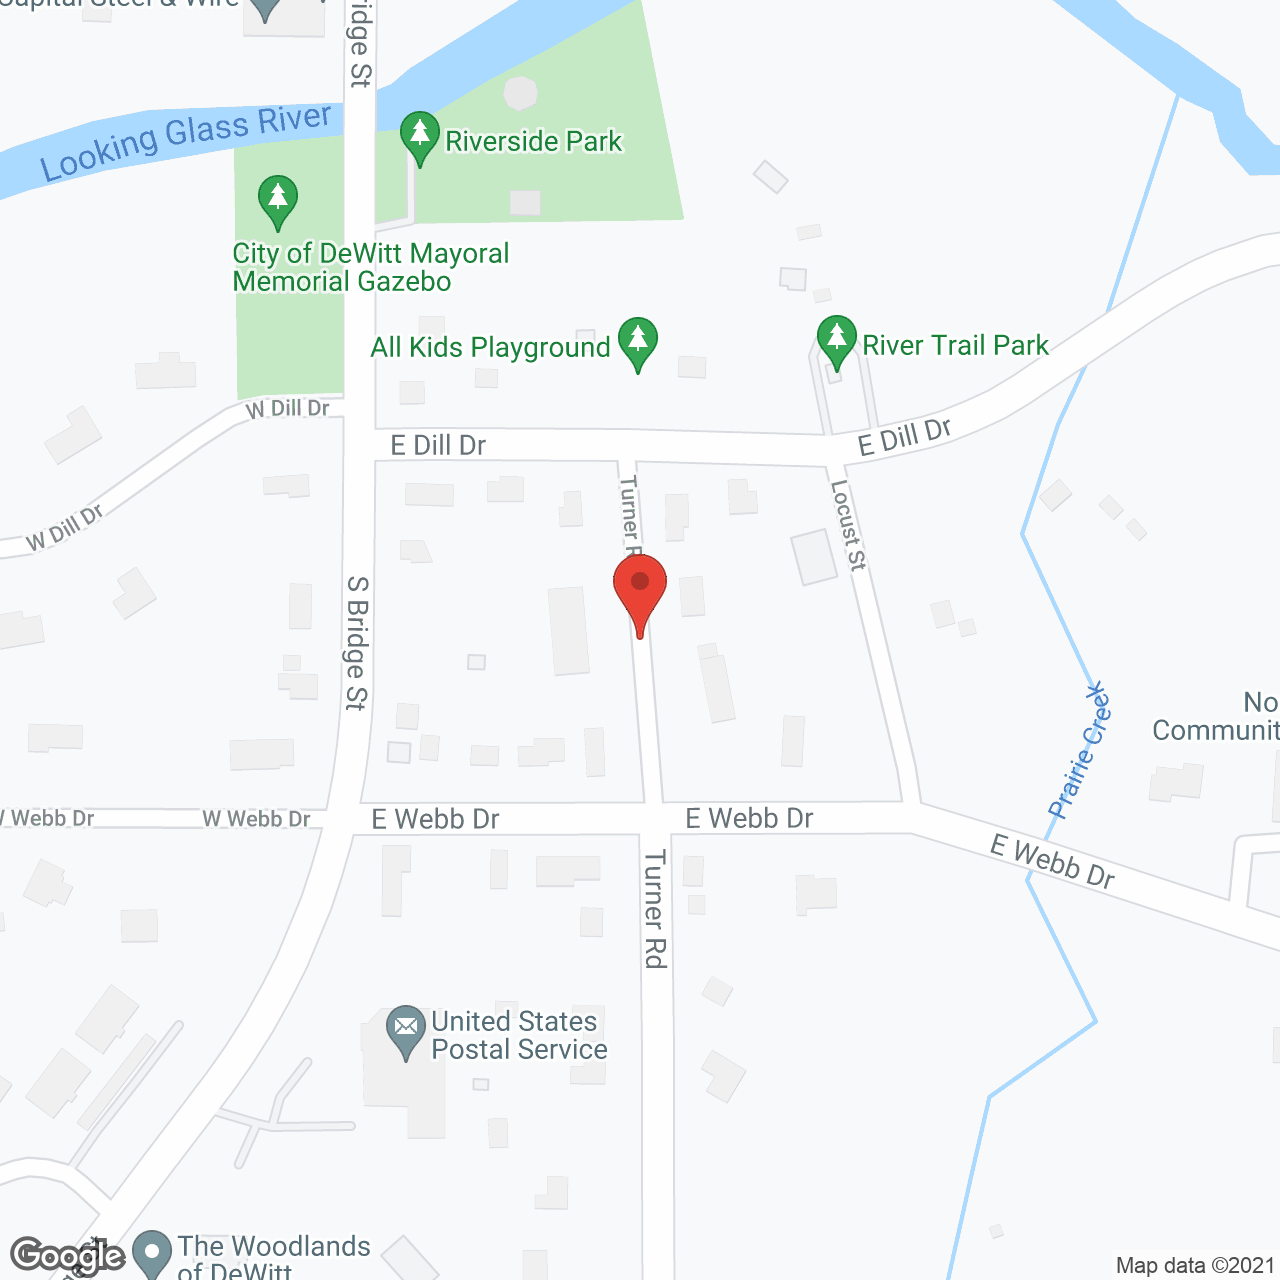 Divine Life Assisted Living Center #1 in google map